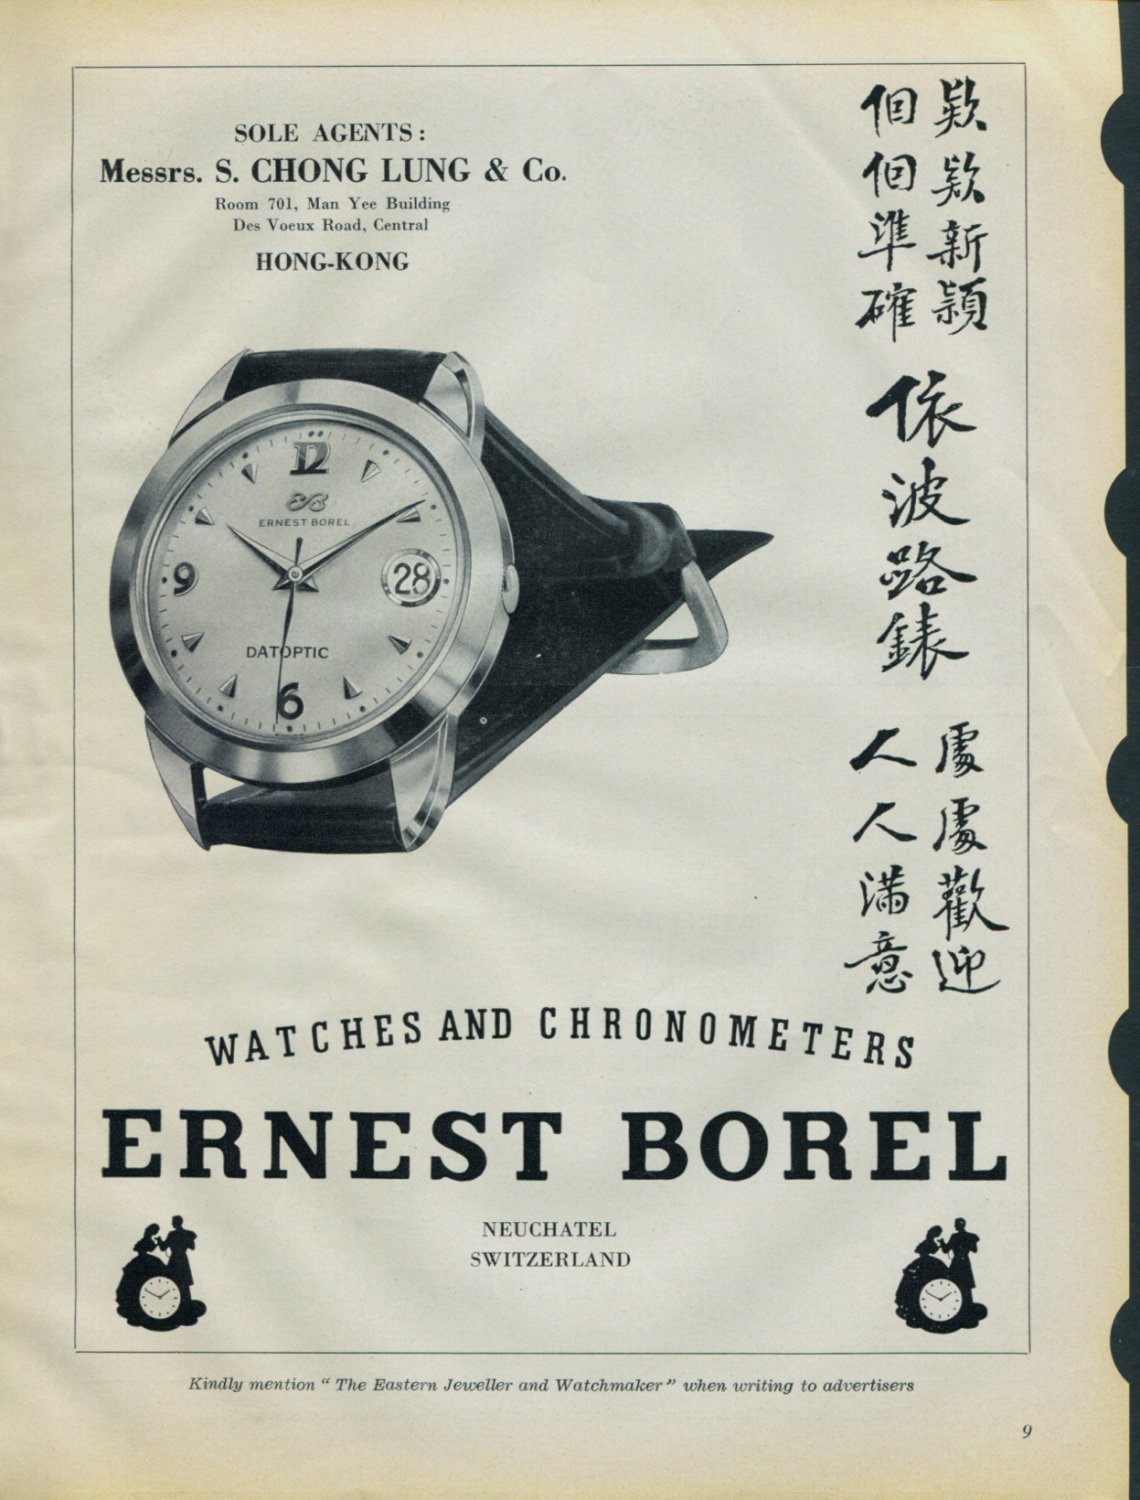 1958 Ernest Borel Watch Company Vintage 1958 Swiss Ad Suisse Advert Chong Lung  Hong Kong